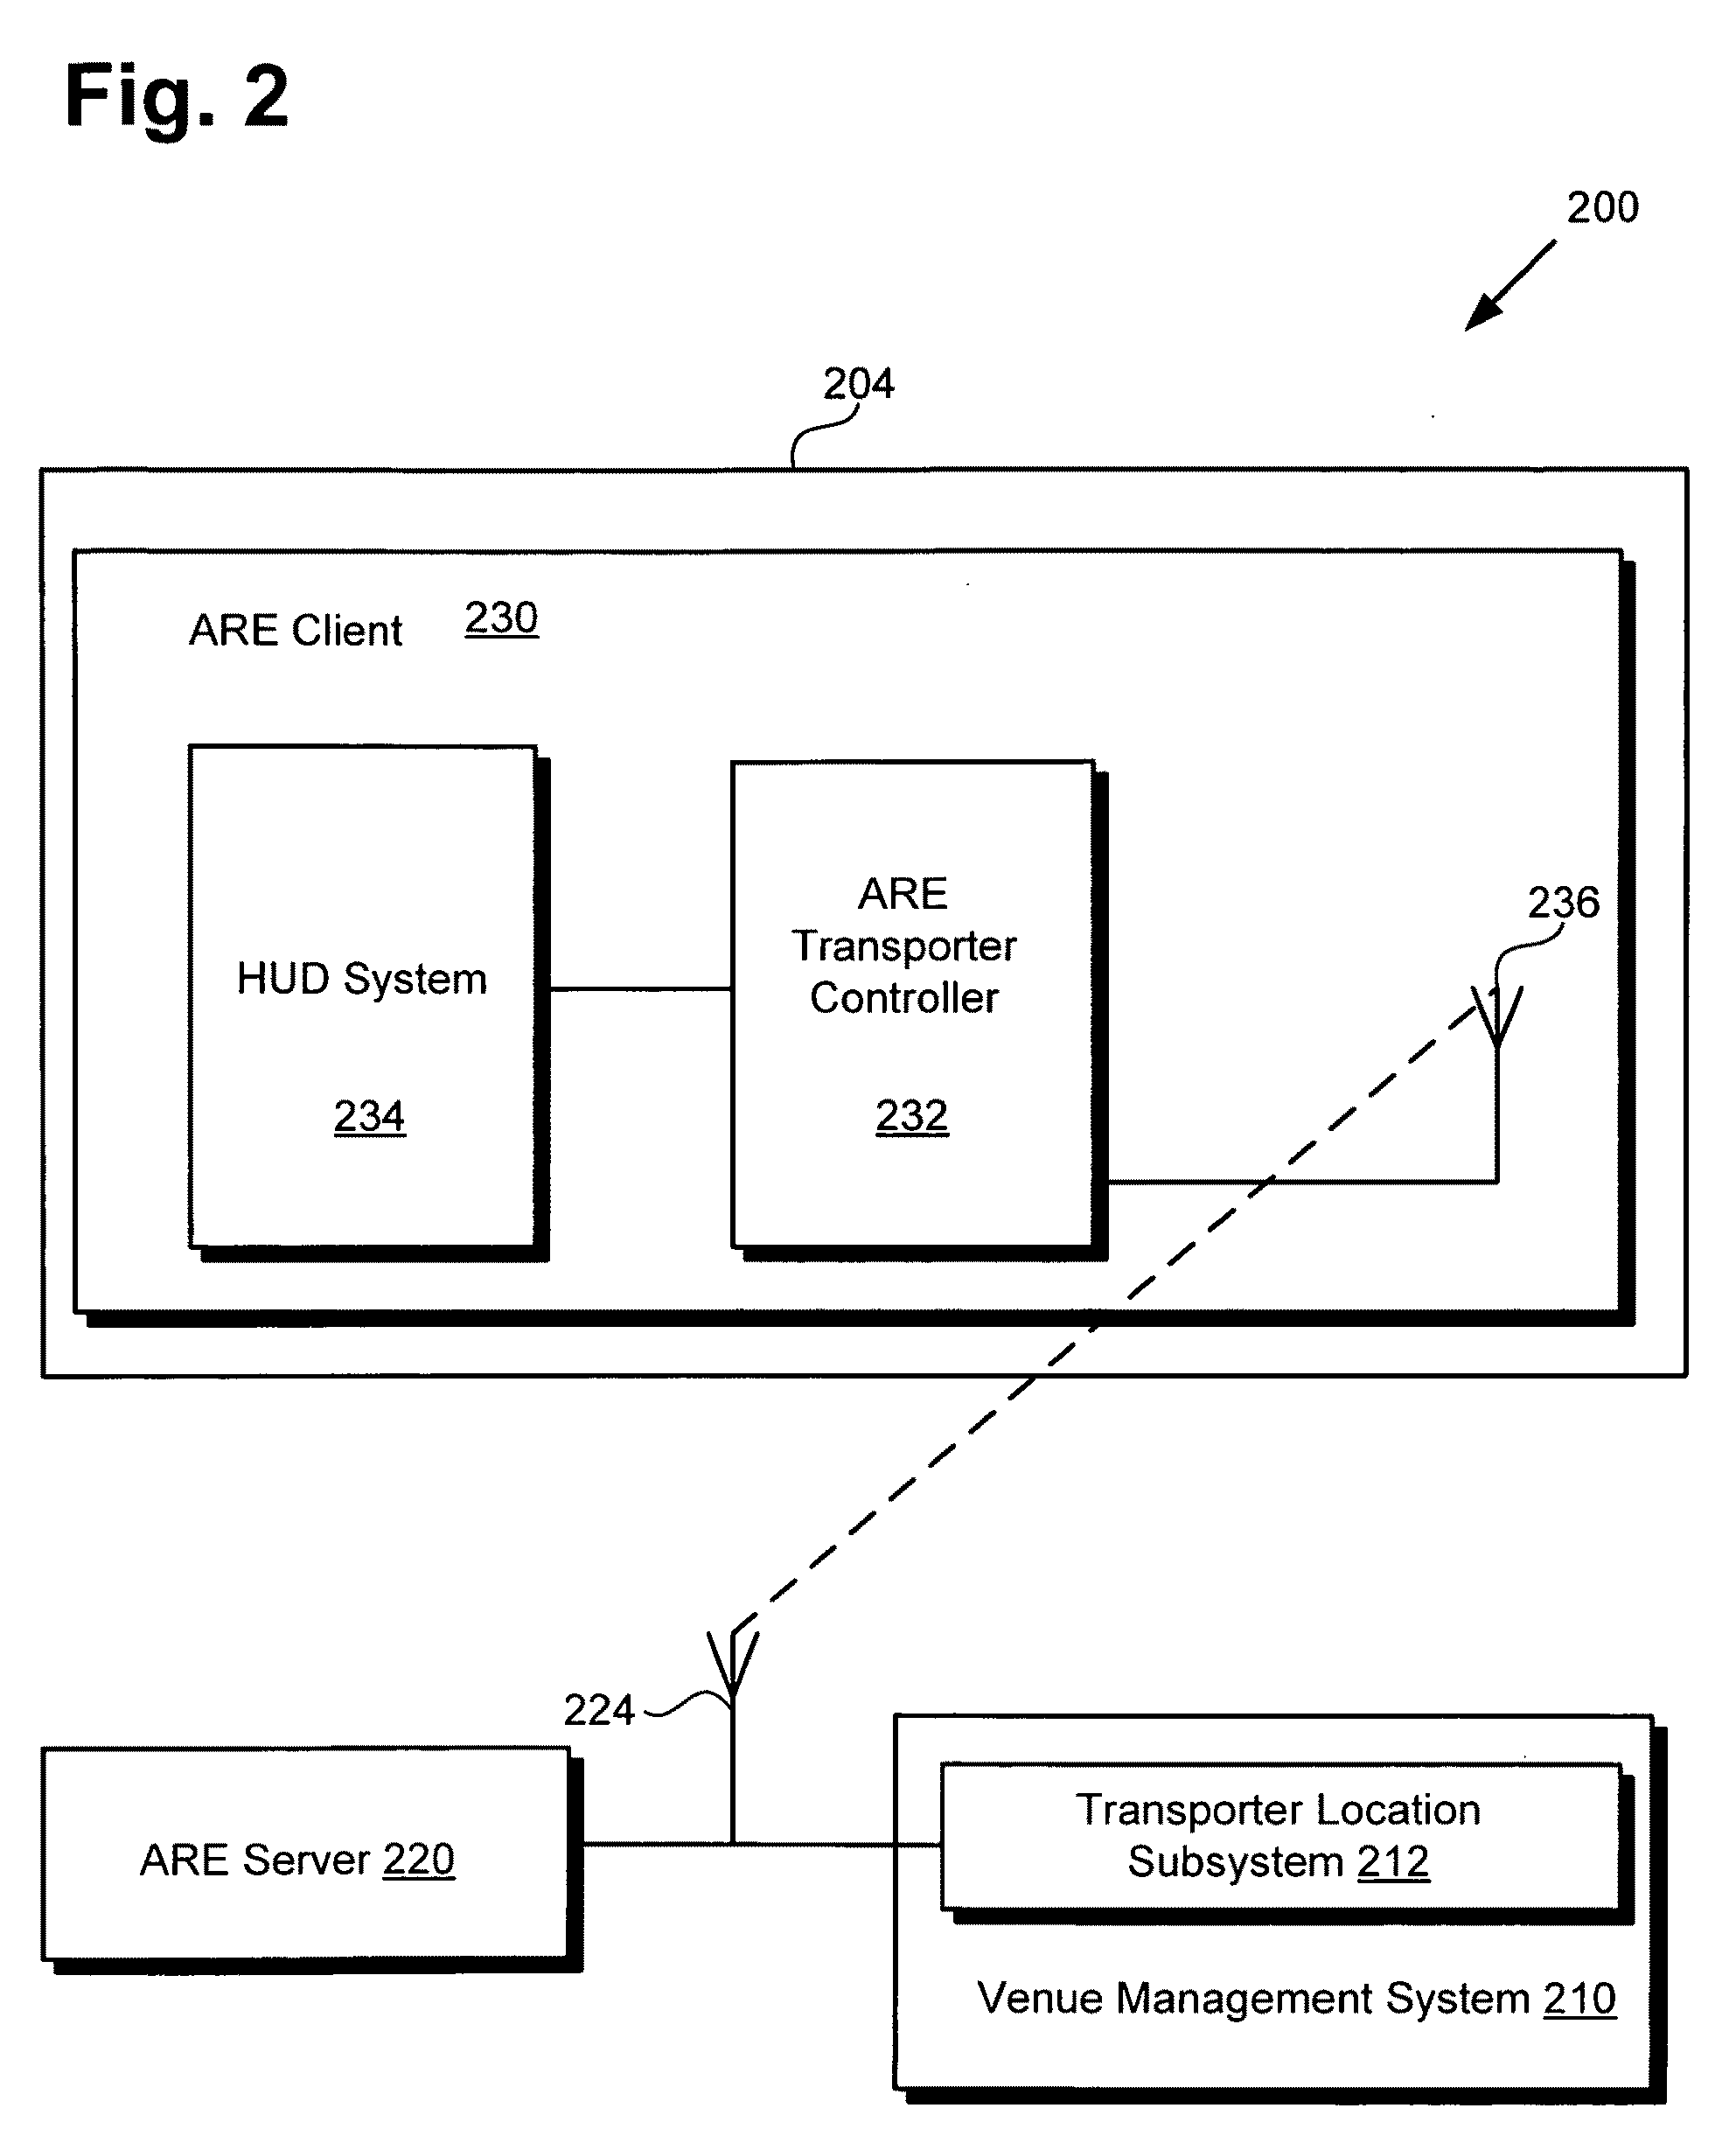 System and method for providing an augmented reality experience